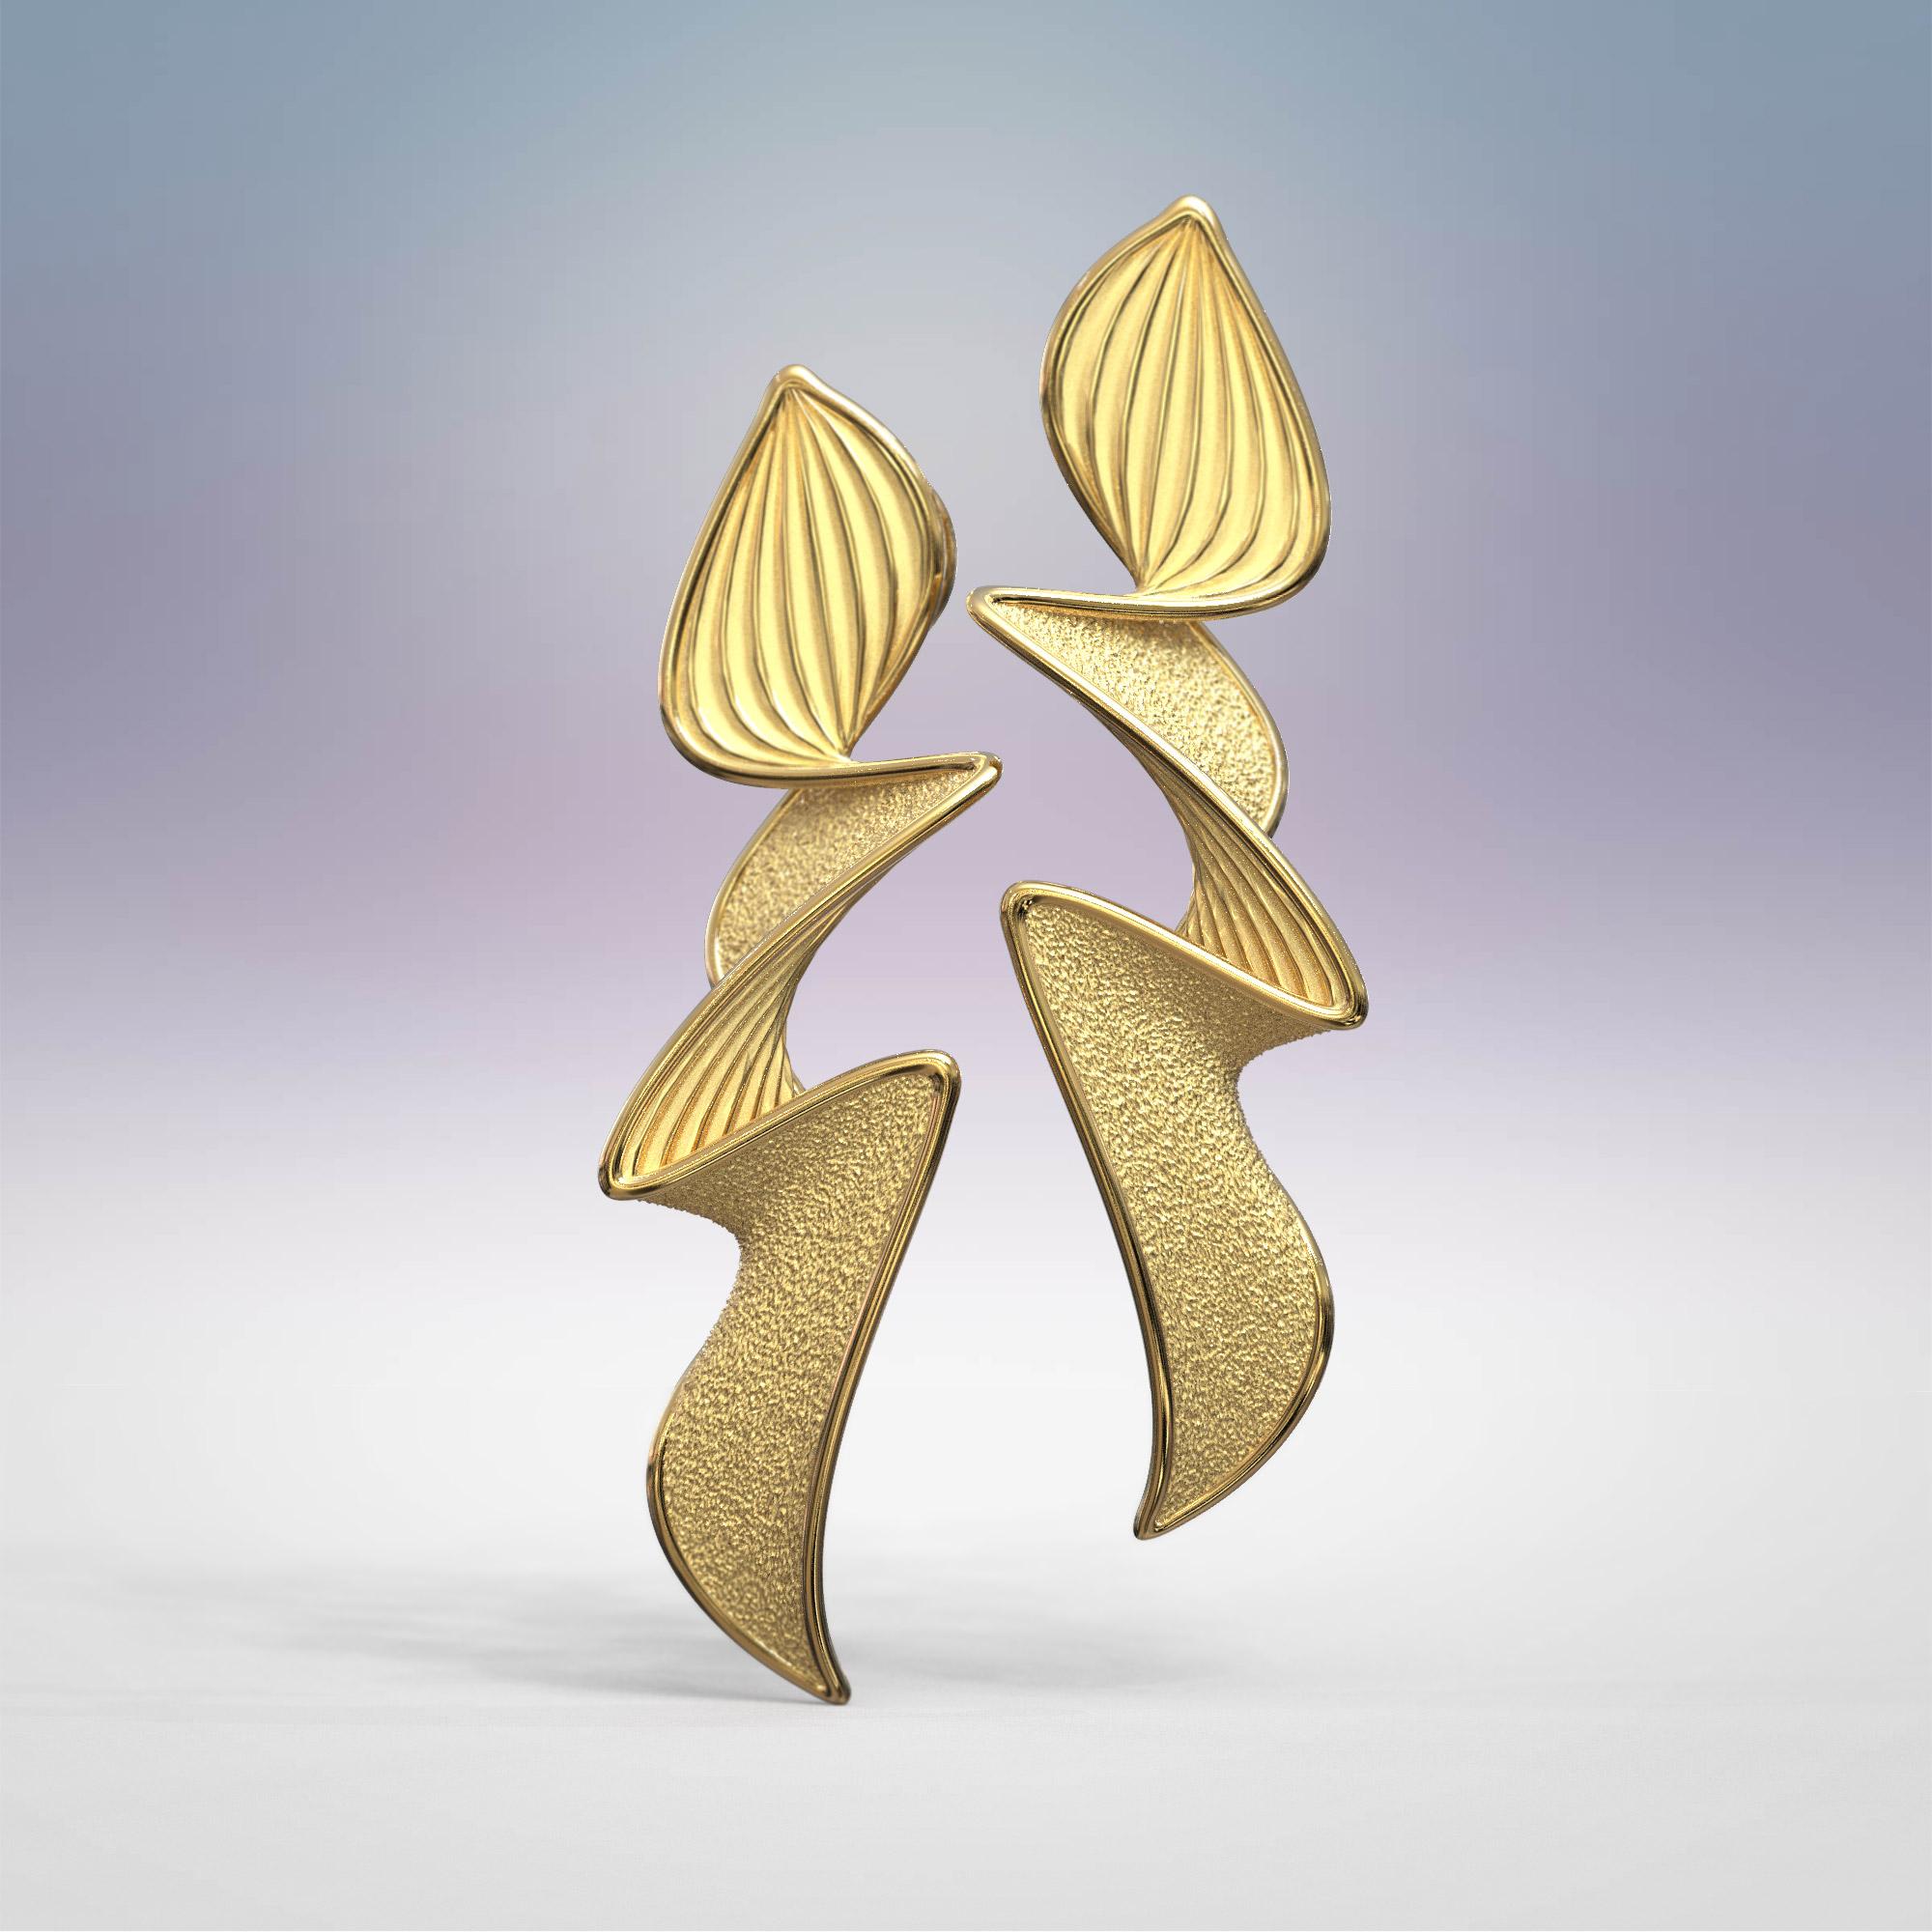 Contemporary Statement Earrings in solid gold 18k,  Italian fine jewelry made in Italy, long stud earring, modern and elegant earrings.
Earring length: 53 Millimeters; Width: 13 Millimeters
Available in yellow gold, rose gold and white gold, 18k or